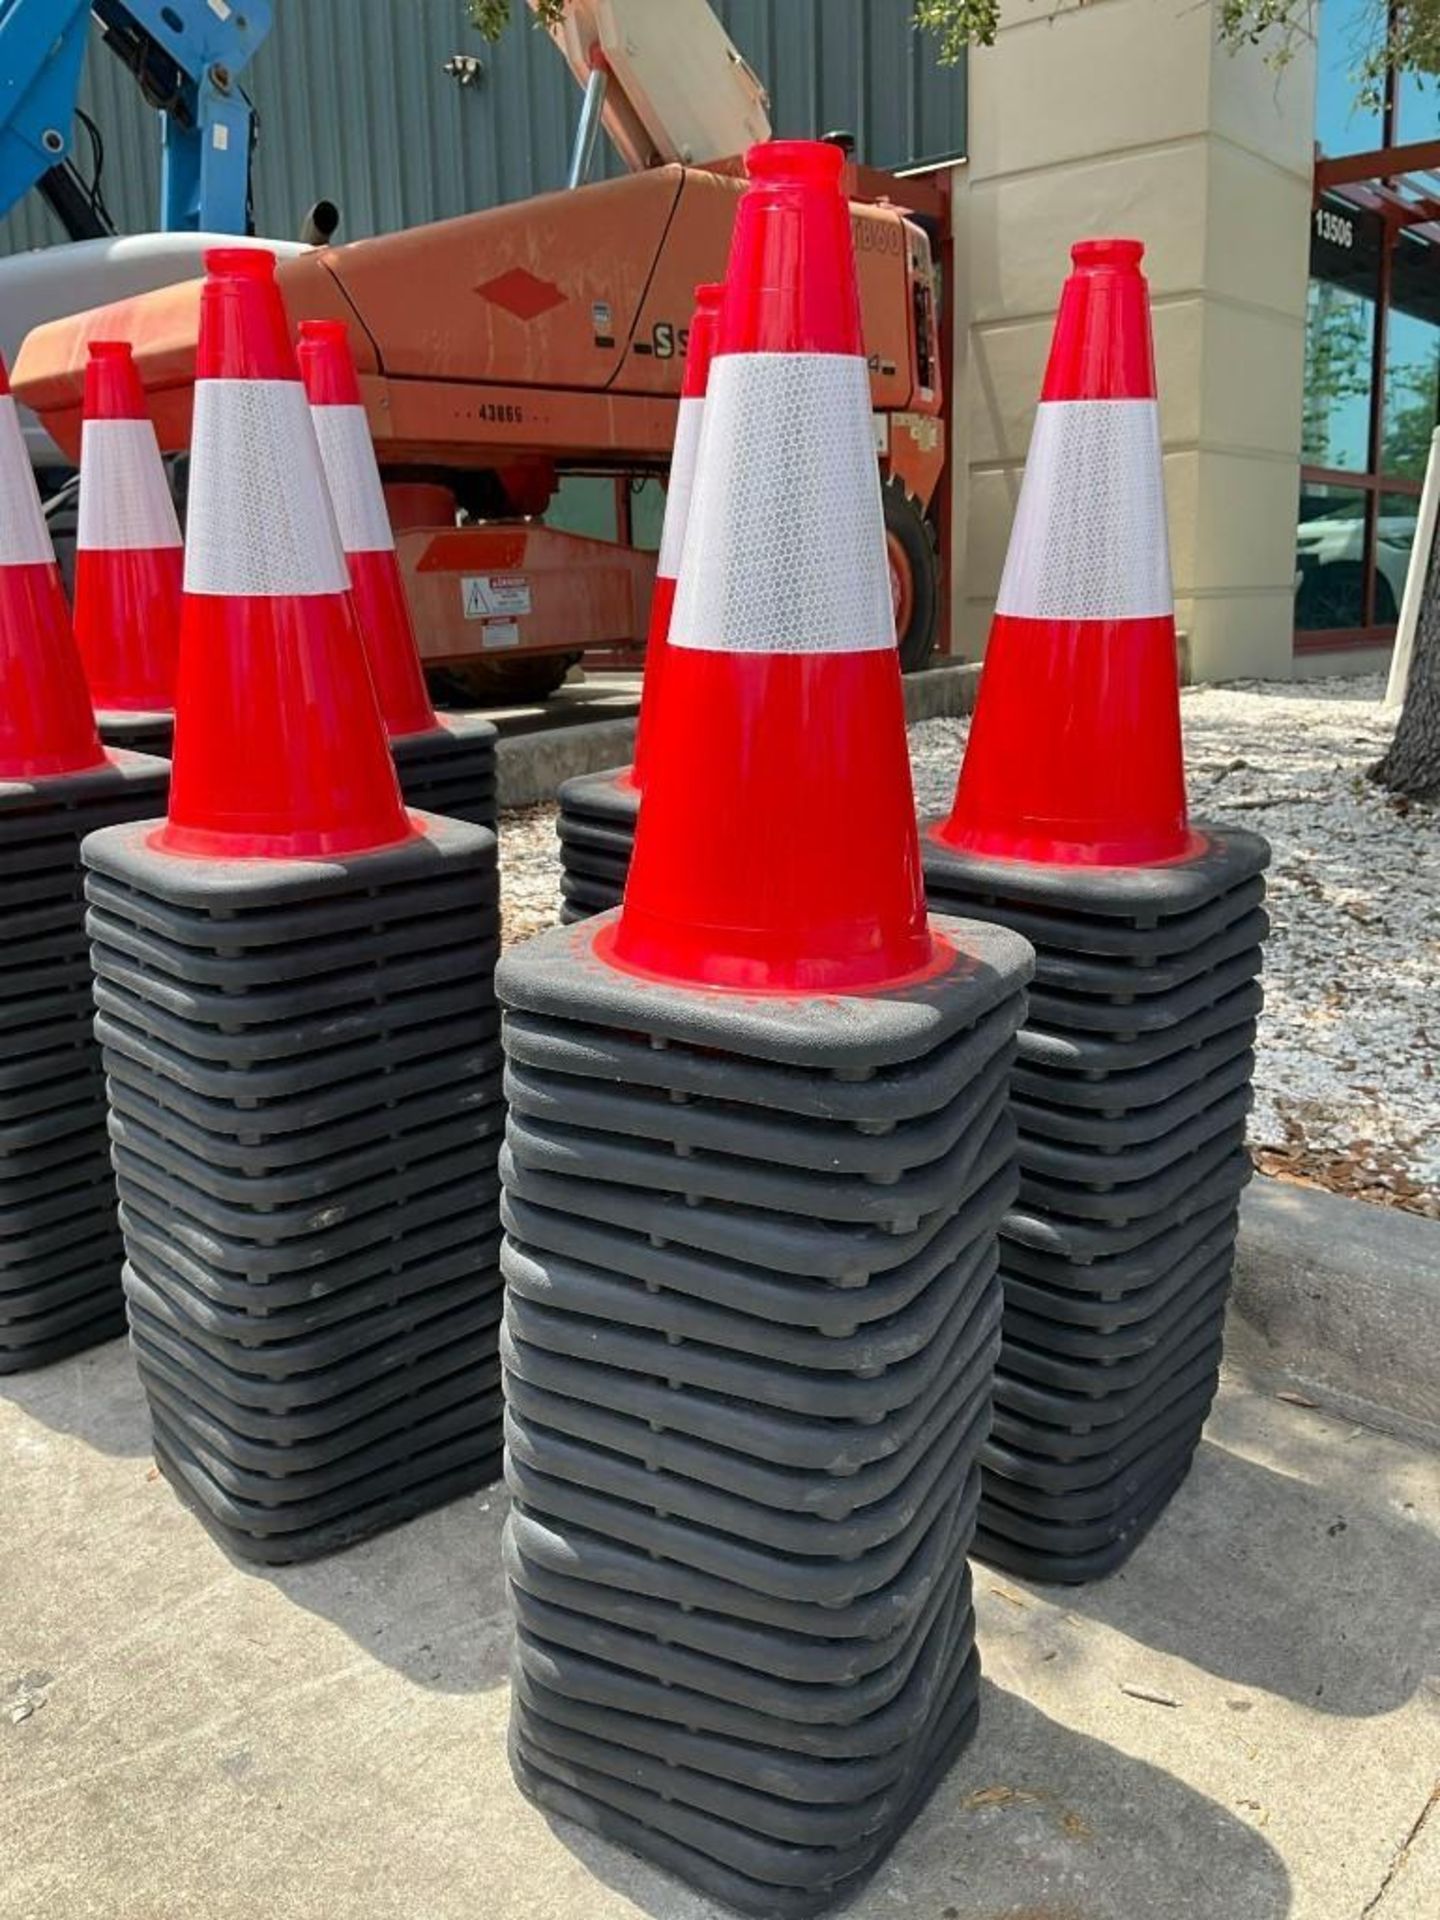 20 SAFETY CONES, 18in TALL - Image 3 of 5